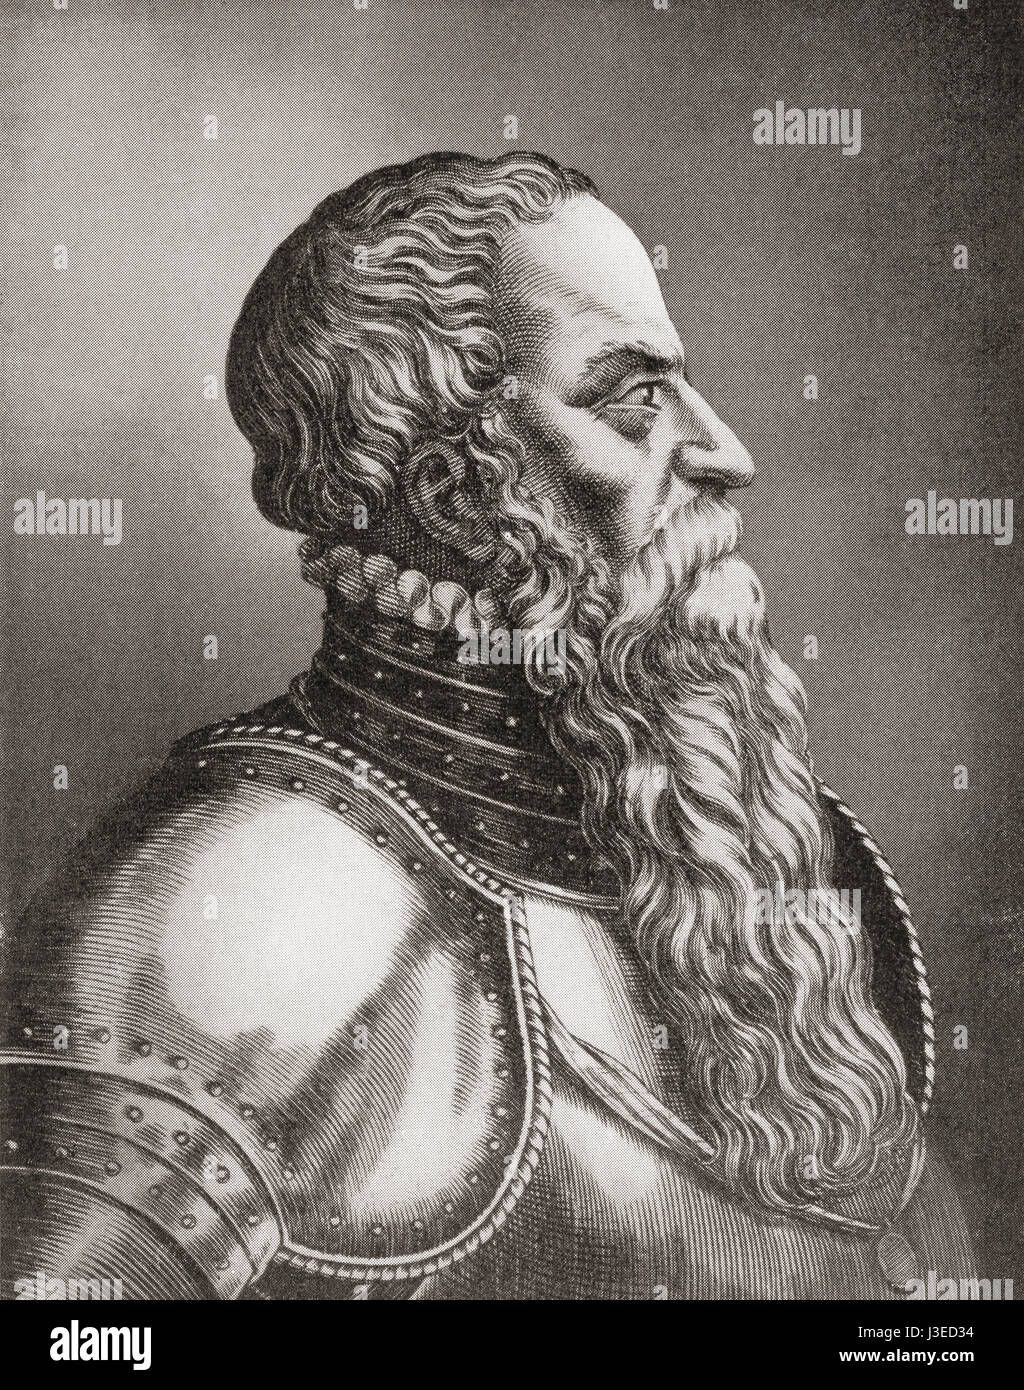 Gustav I, born Gustav Eriksson of the Vasa noble family and later known as Gustav Vasa, 1496 - 1560.  King of Sweden.  From Hutchinson's History of the Nations, published 1915. Stock Photo